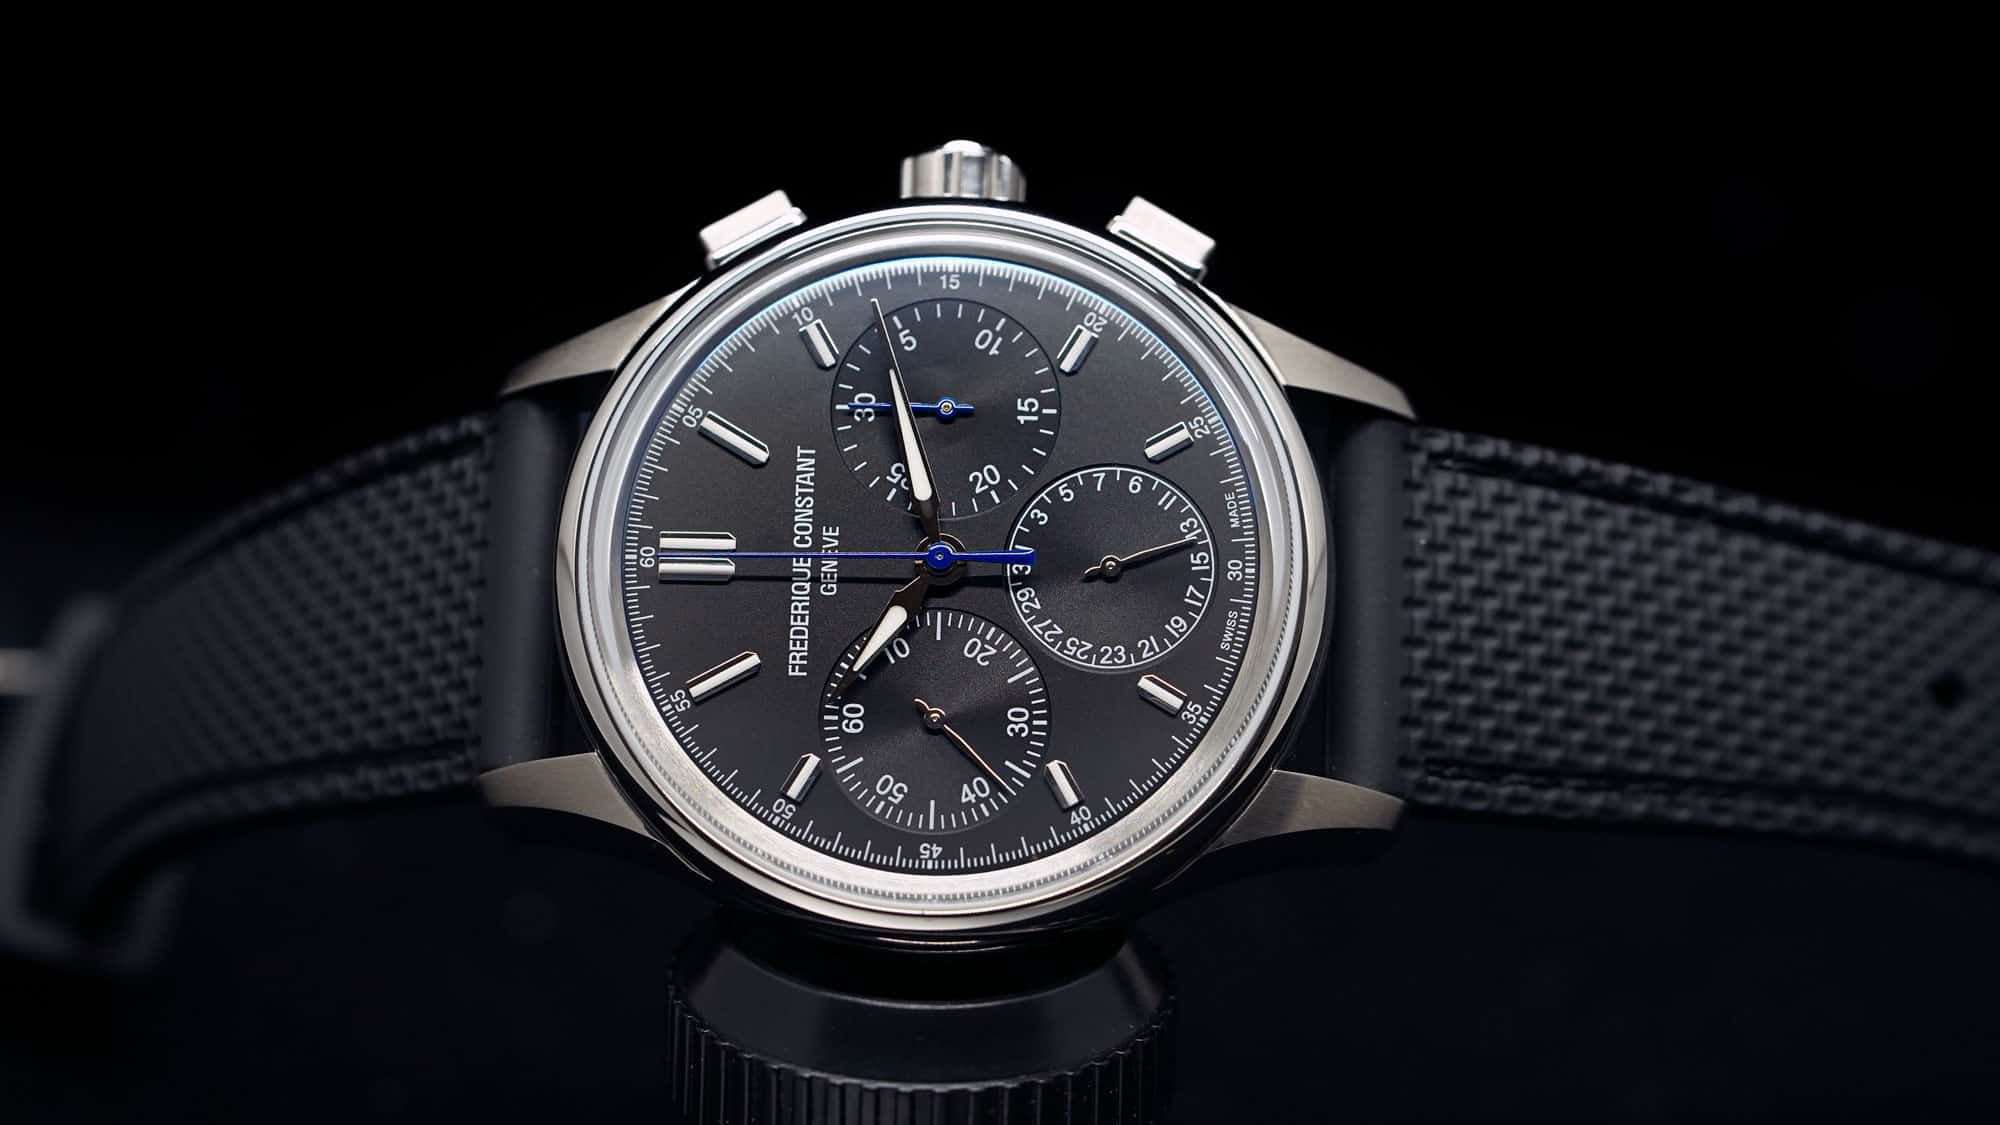 Frederique Constant Flyback Chronograph “DailyWatch” II